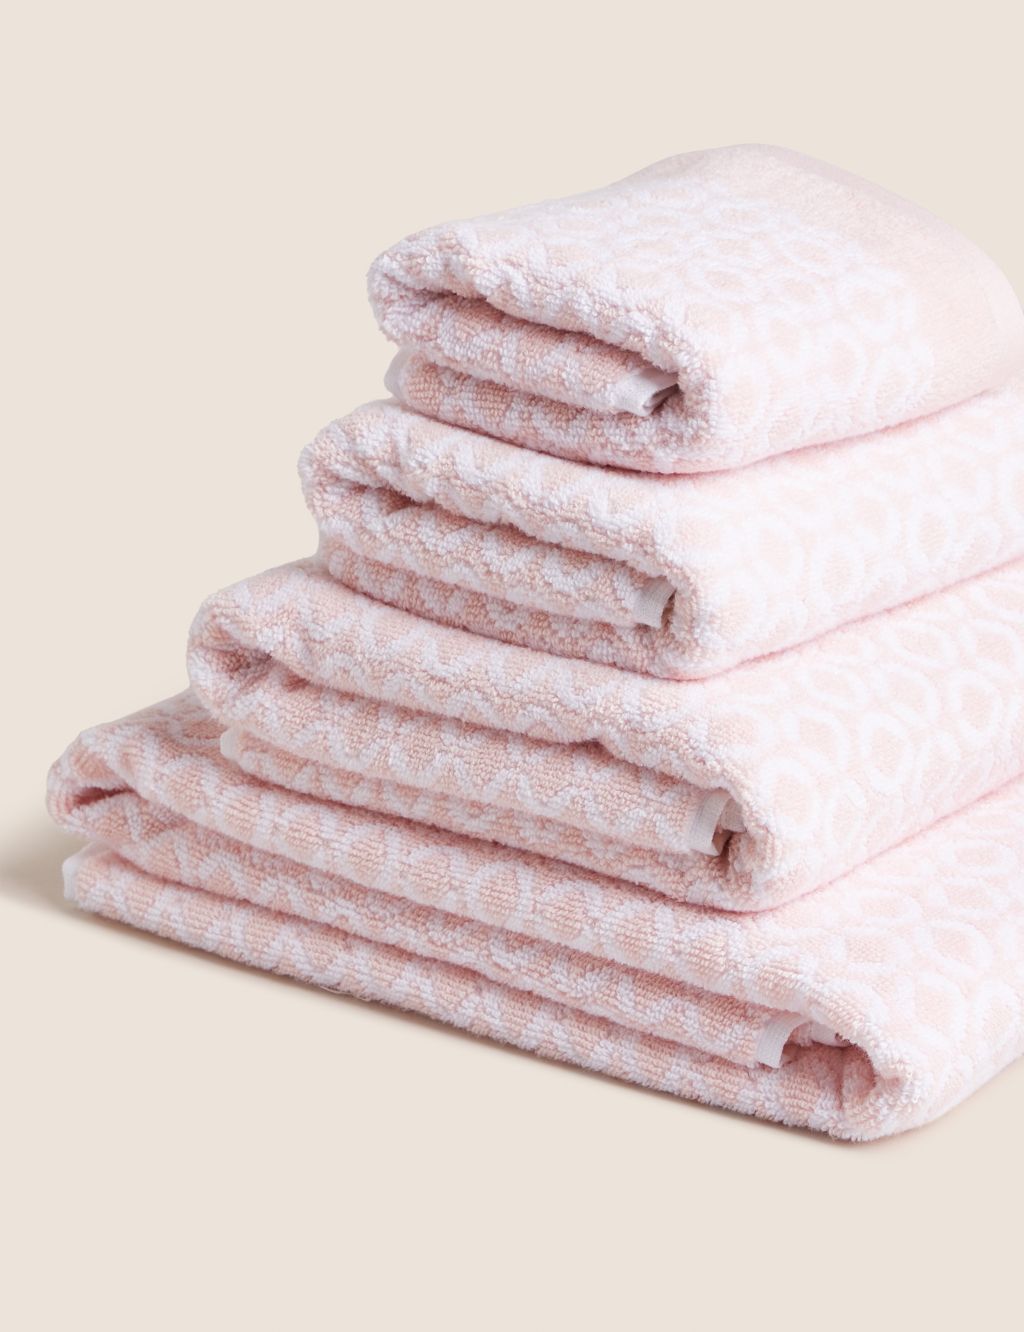 Pure Cotton Repeat Links Towel image 1